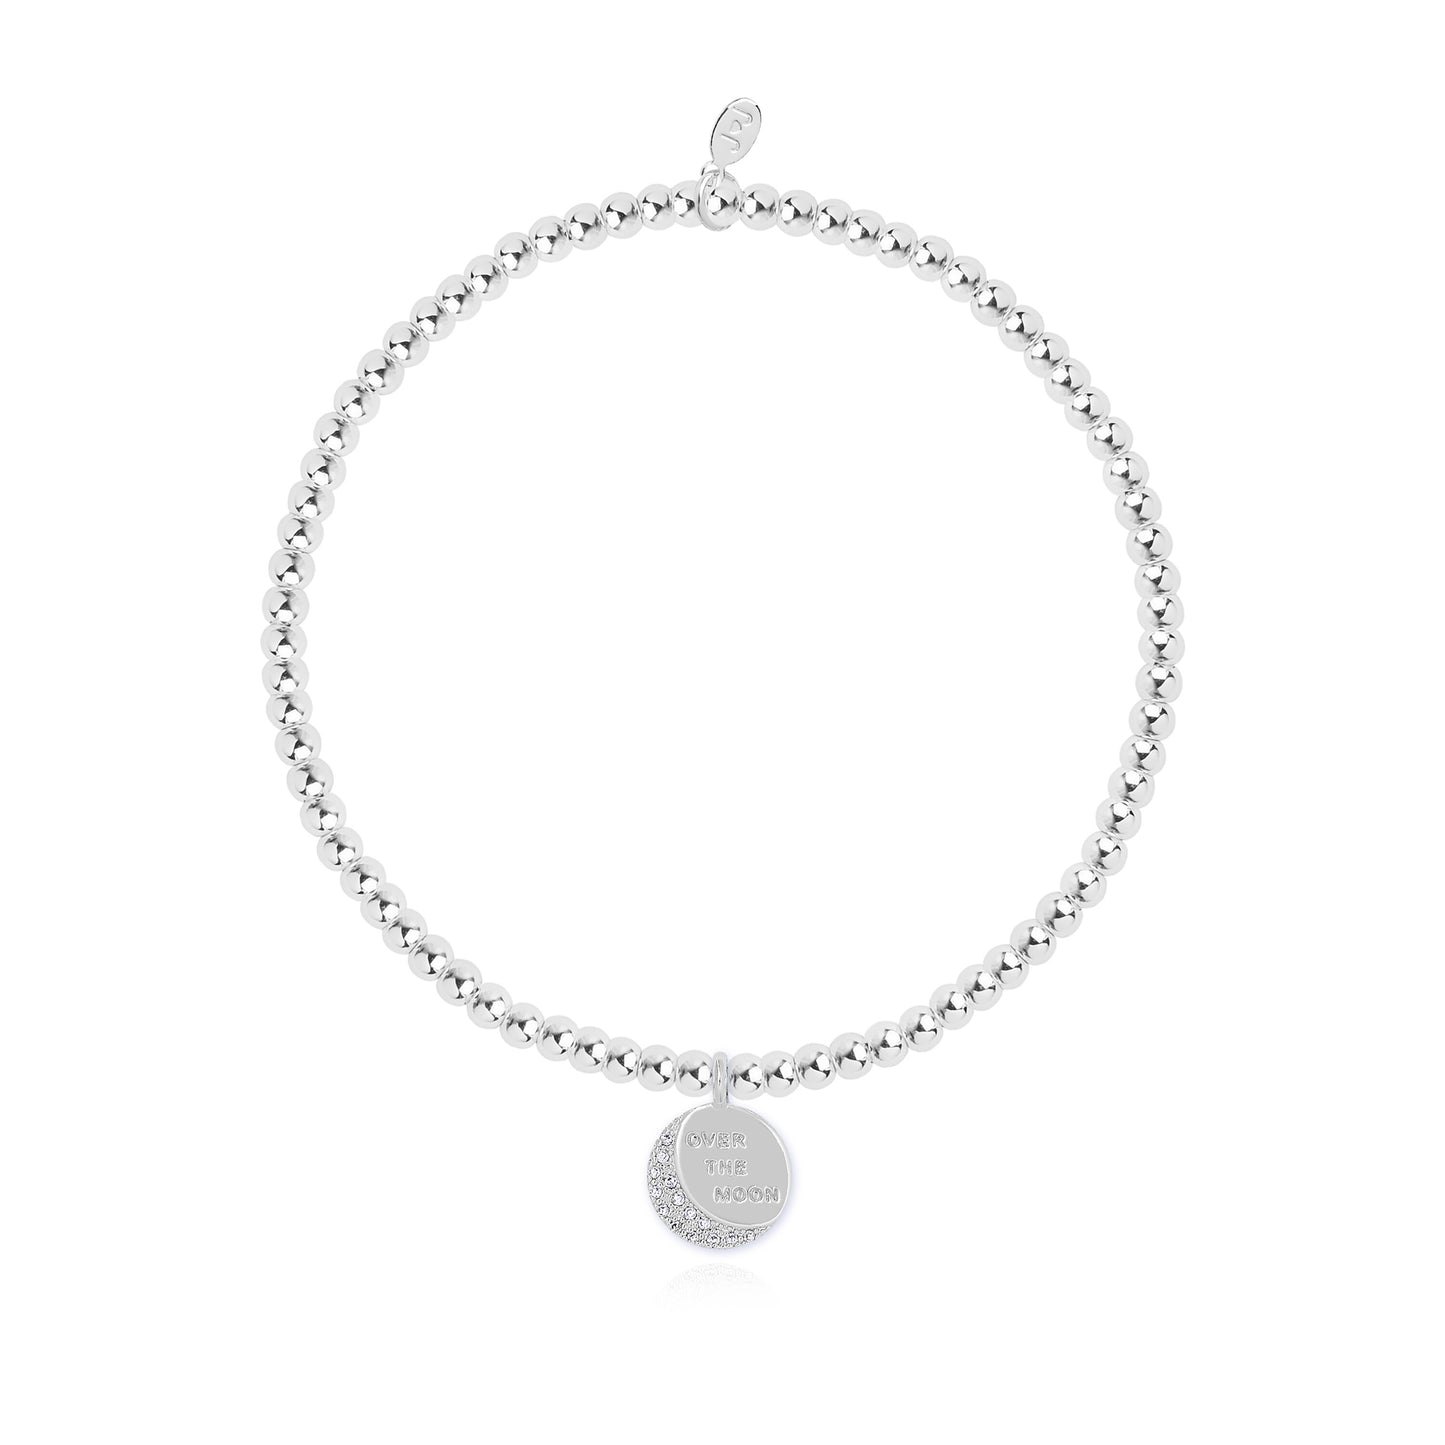 A Little Over The Moon Silver Bracelet